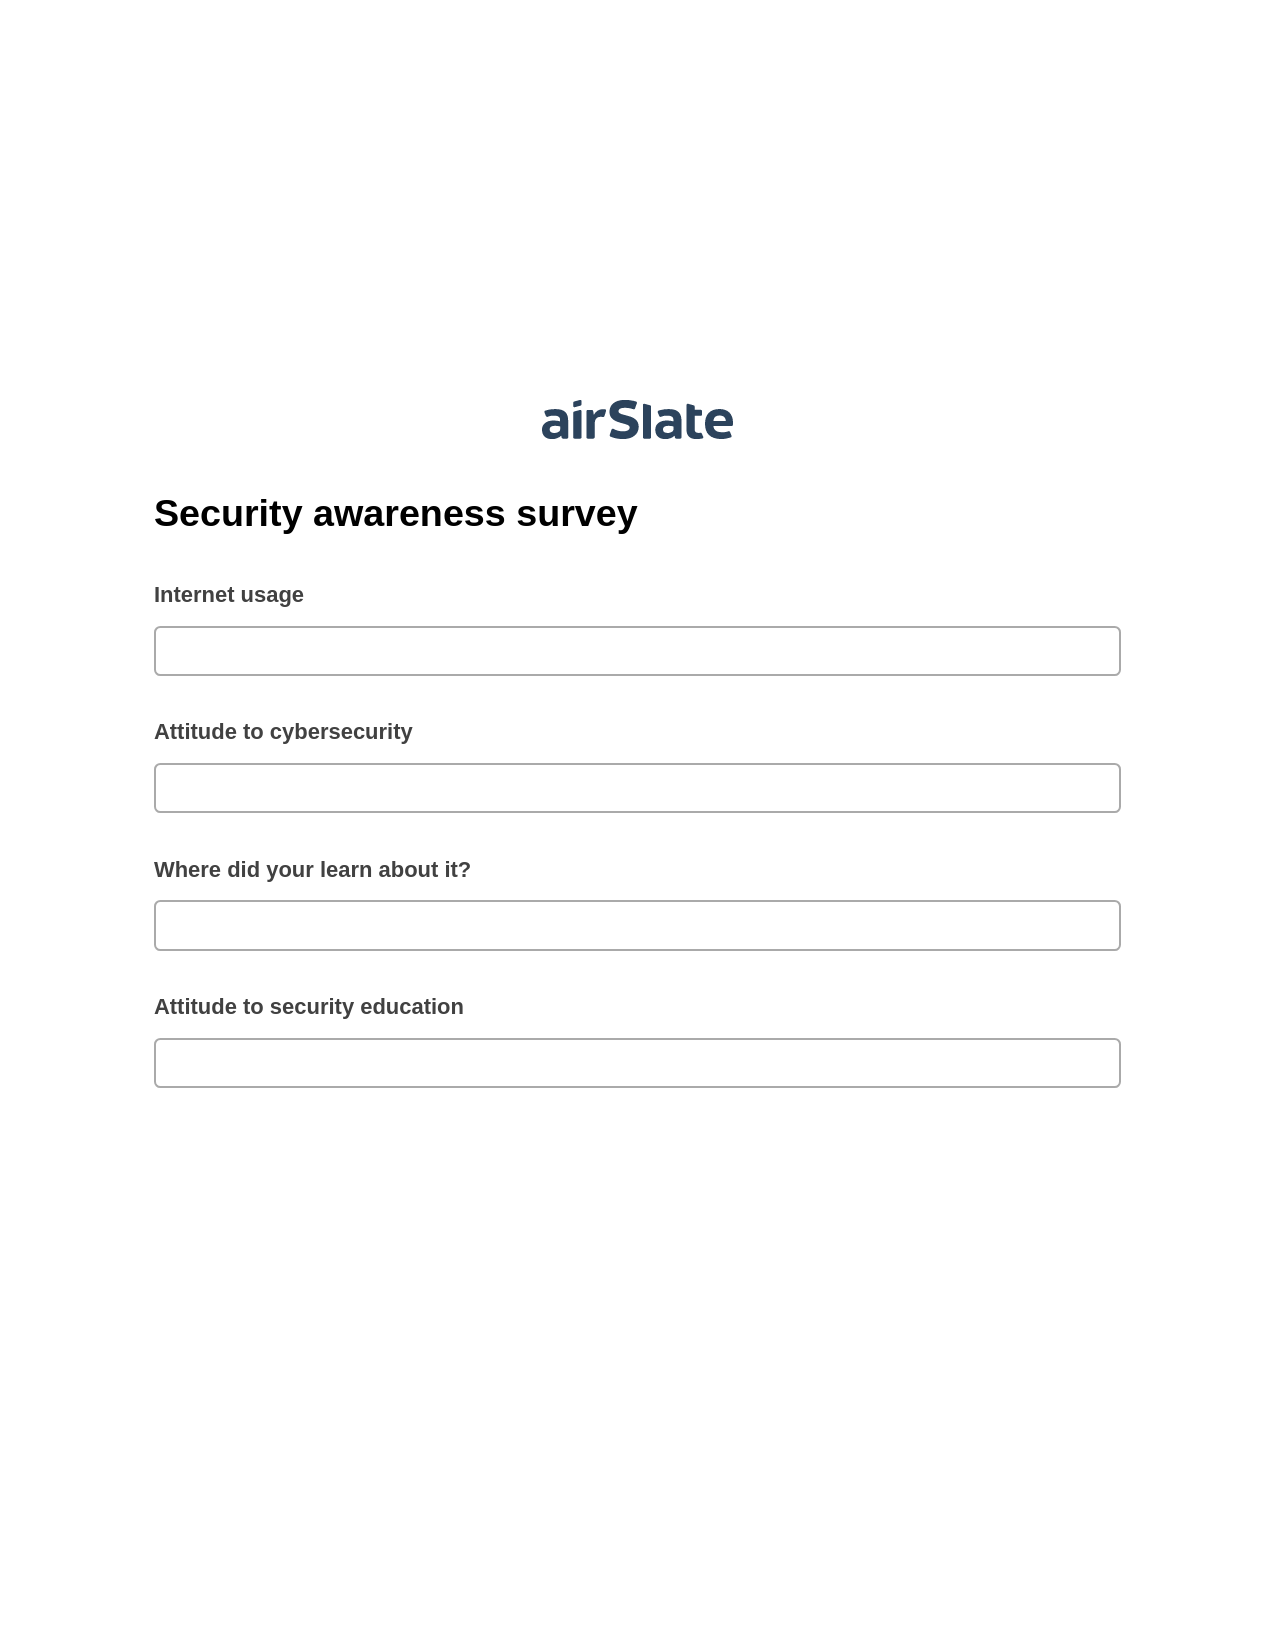 Multirole Security awareness survey Pre-fill from MS Dynamics 365 Records DEPRECATED, Send a Slate to Salesforce Contact Bot, Webhook Postfinish Bot